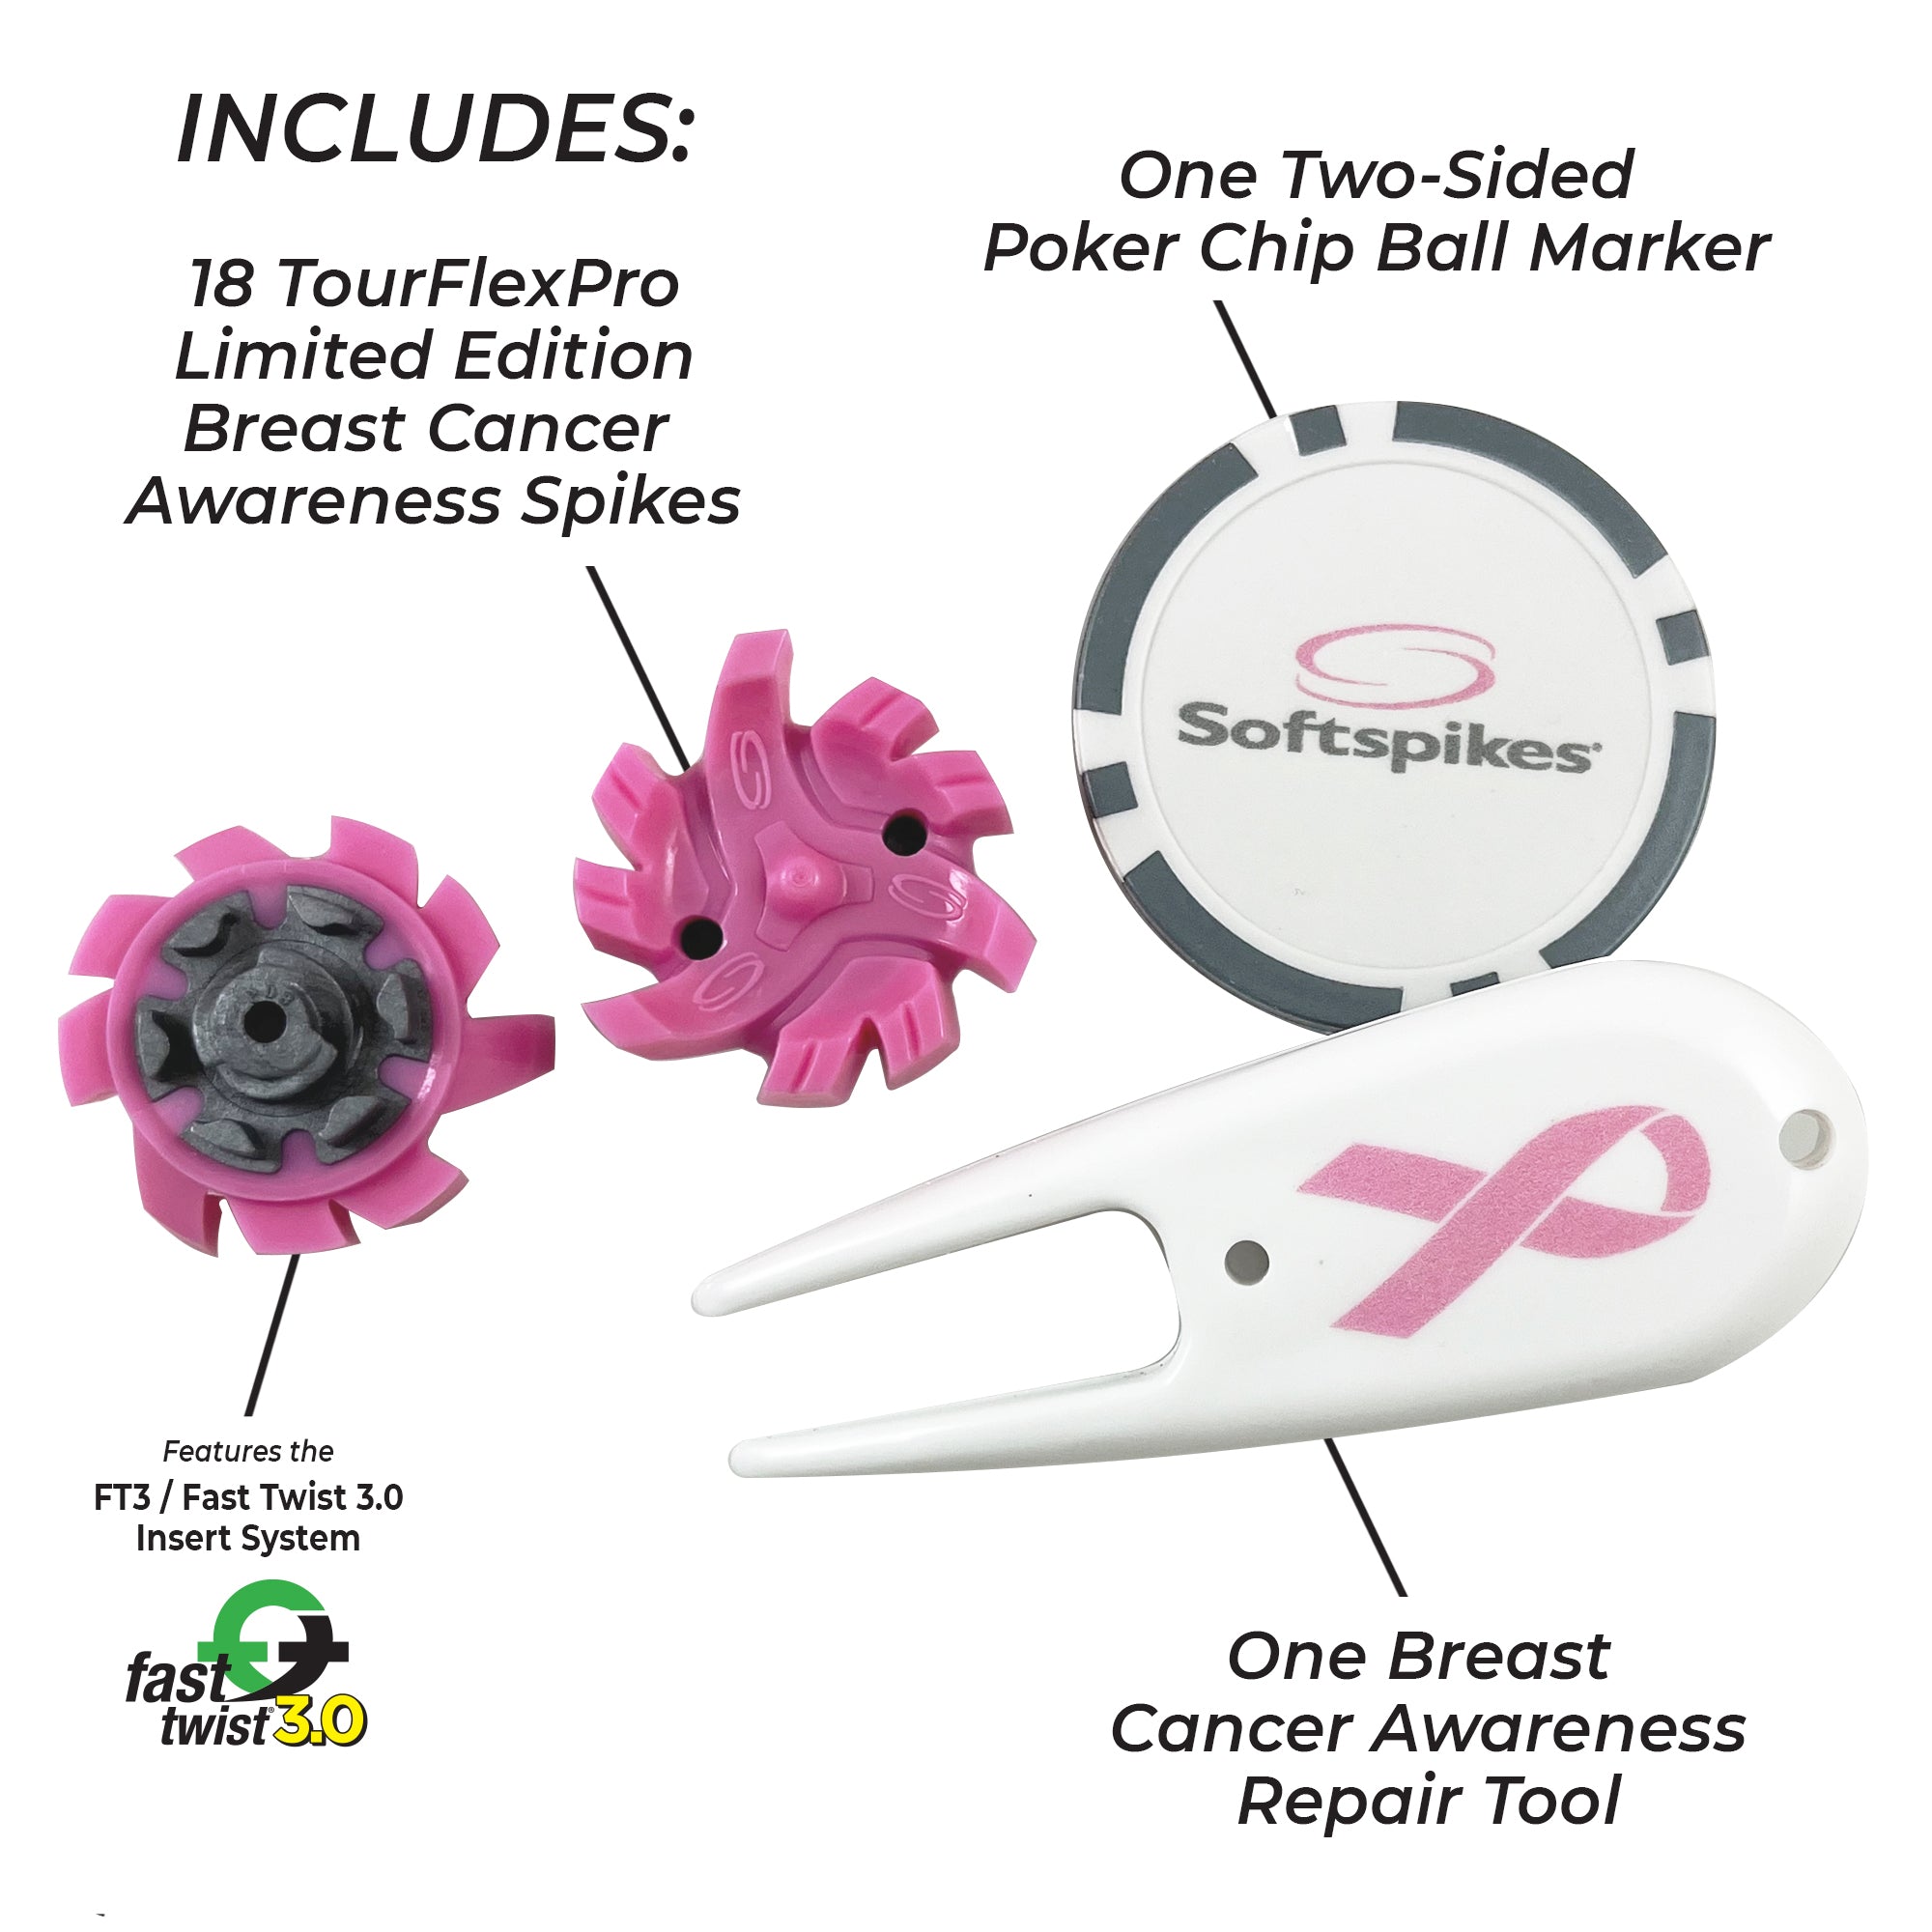 Limited Edition Breast Cancer Awareness Tour Flex Pro Kit (Fast